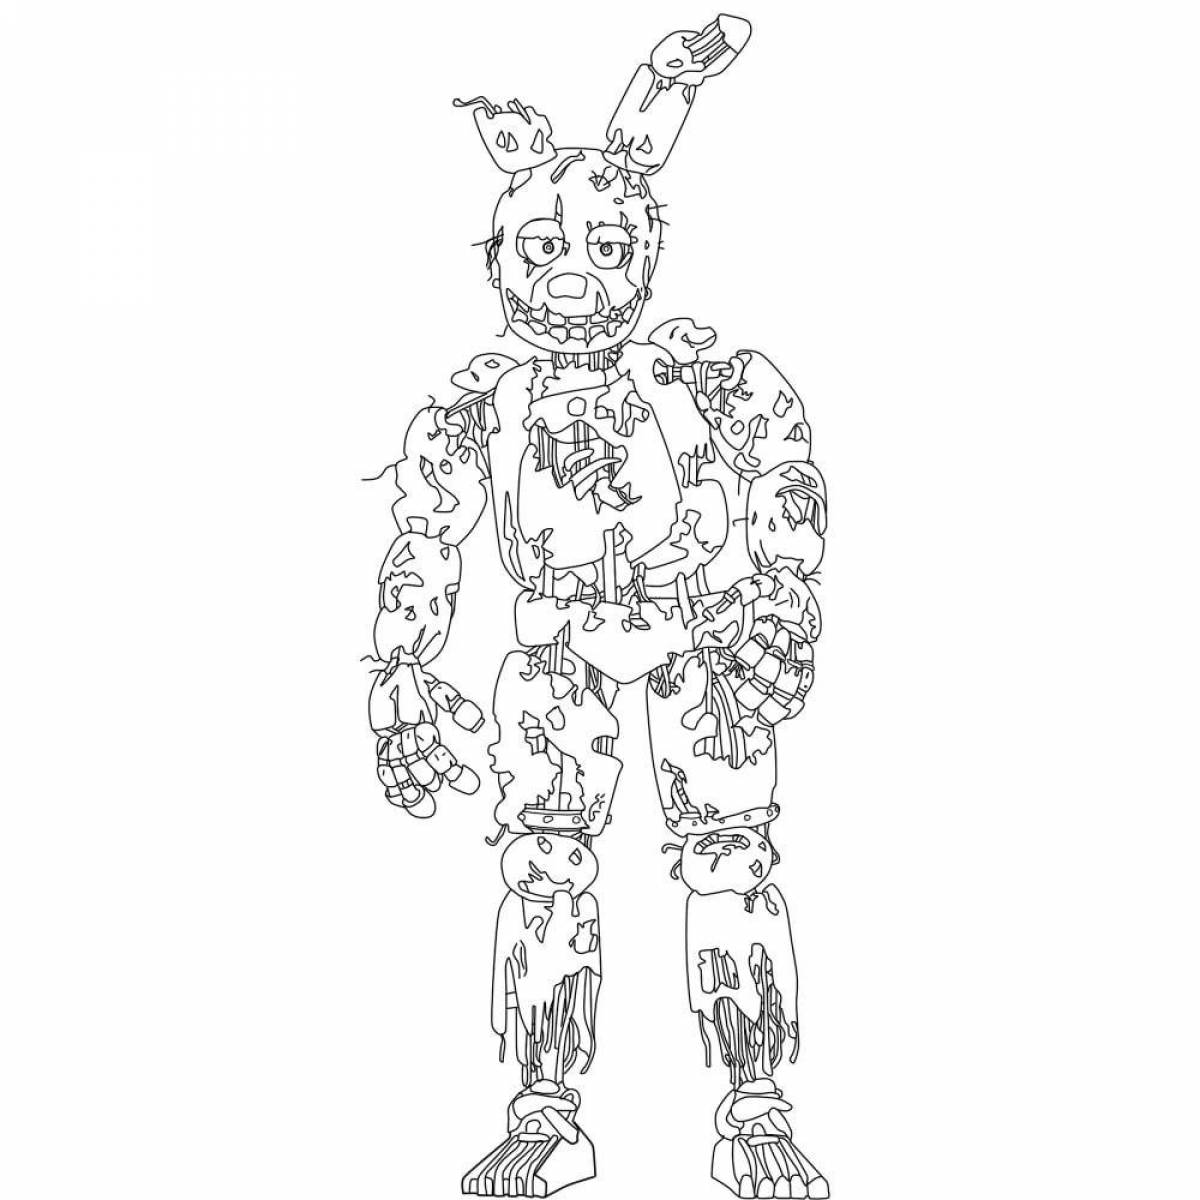 Springtrap shiny coloring page